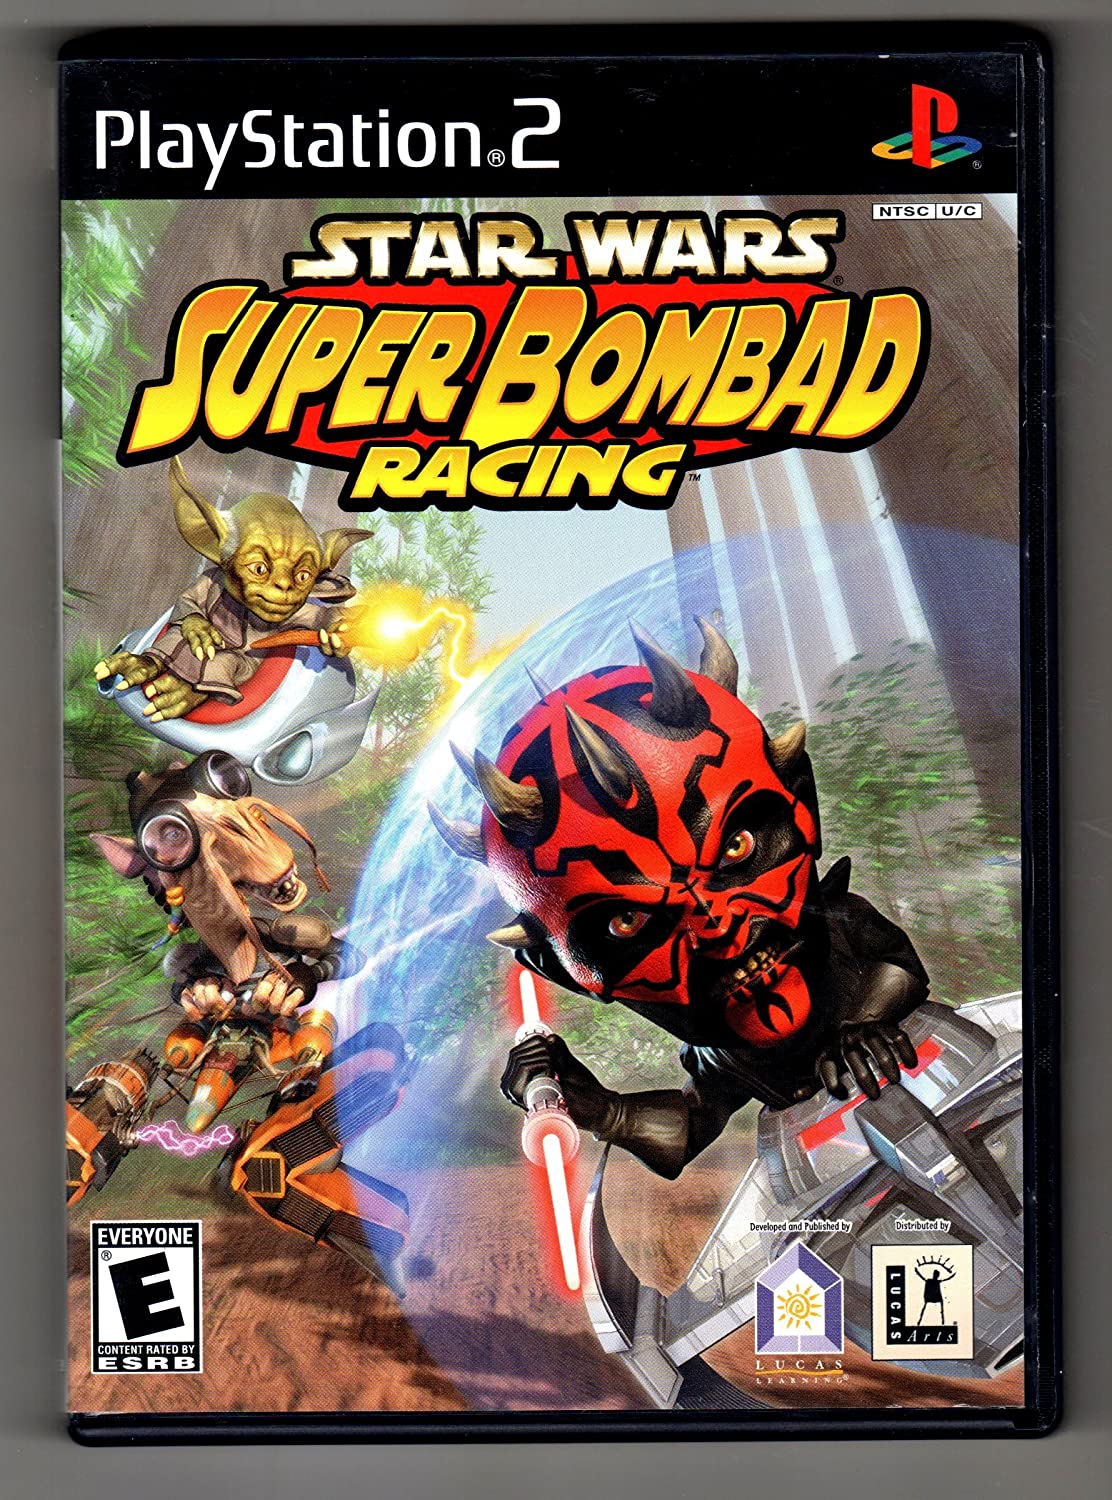 Star Wars: Super Bombad Racing player count stats